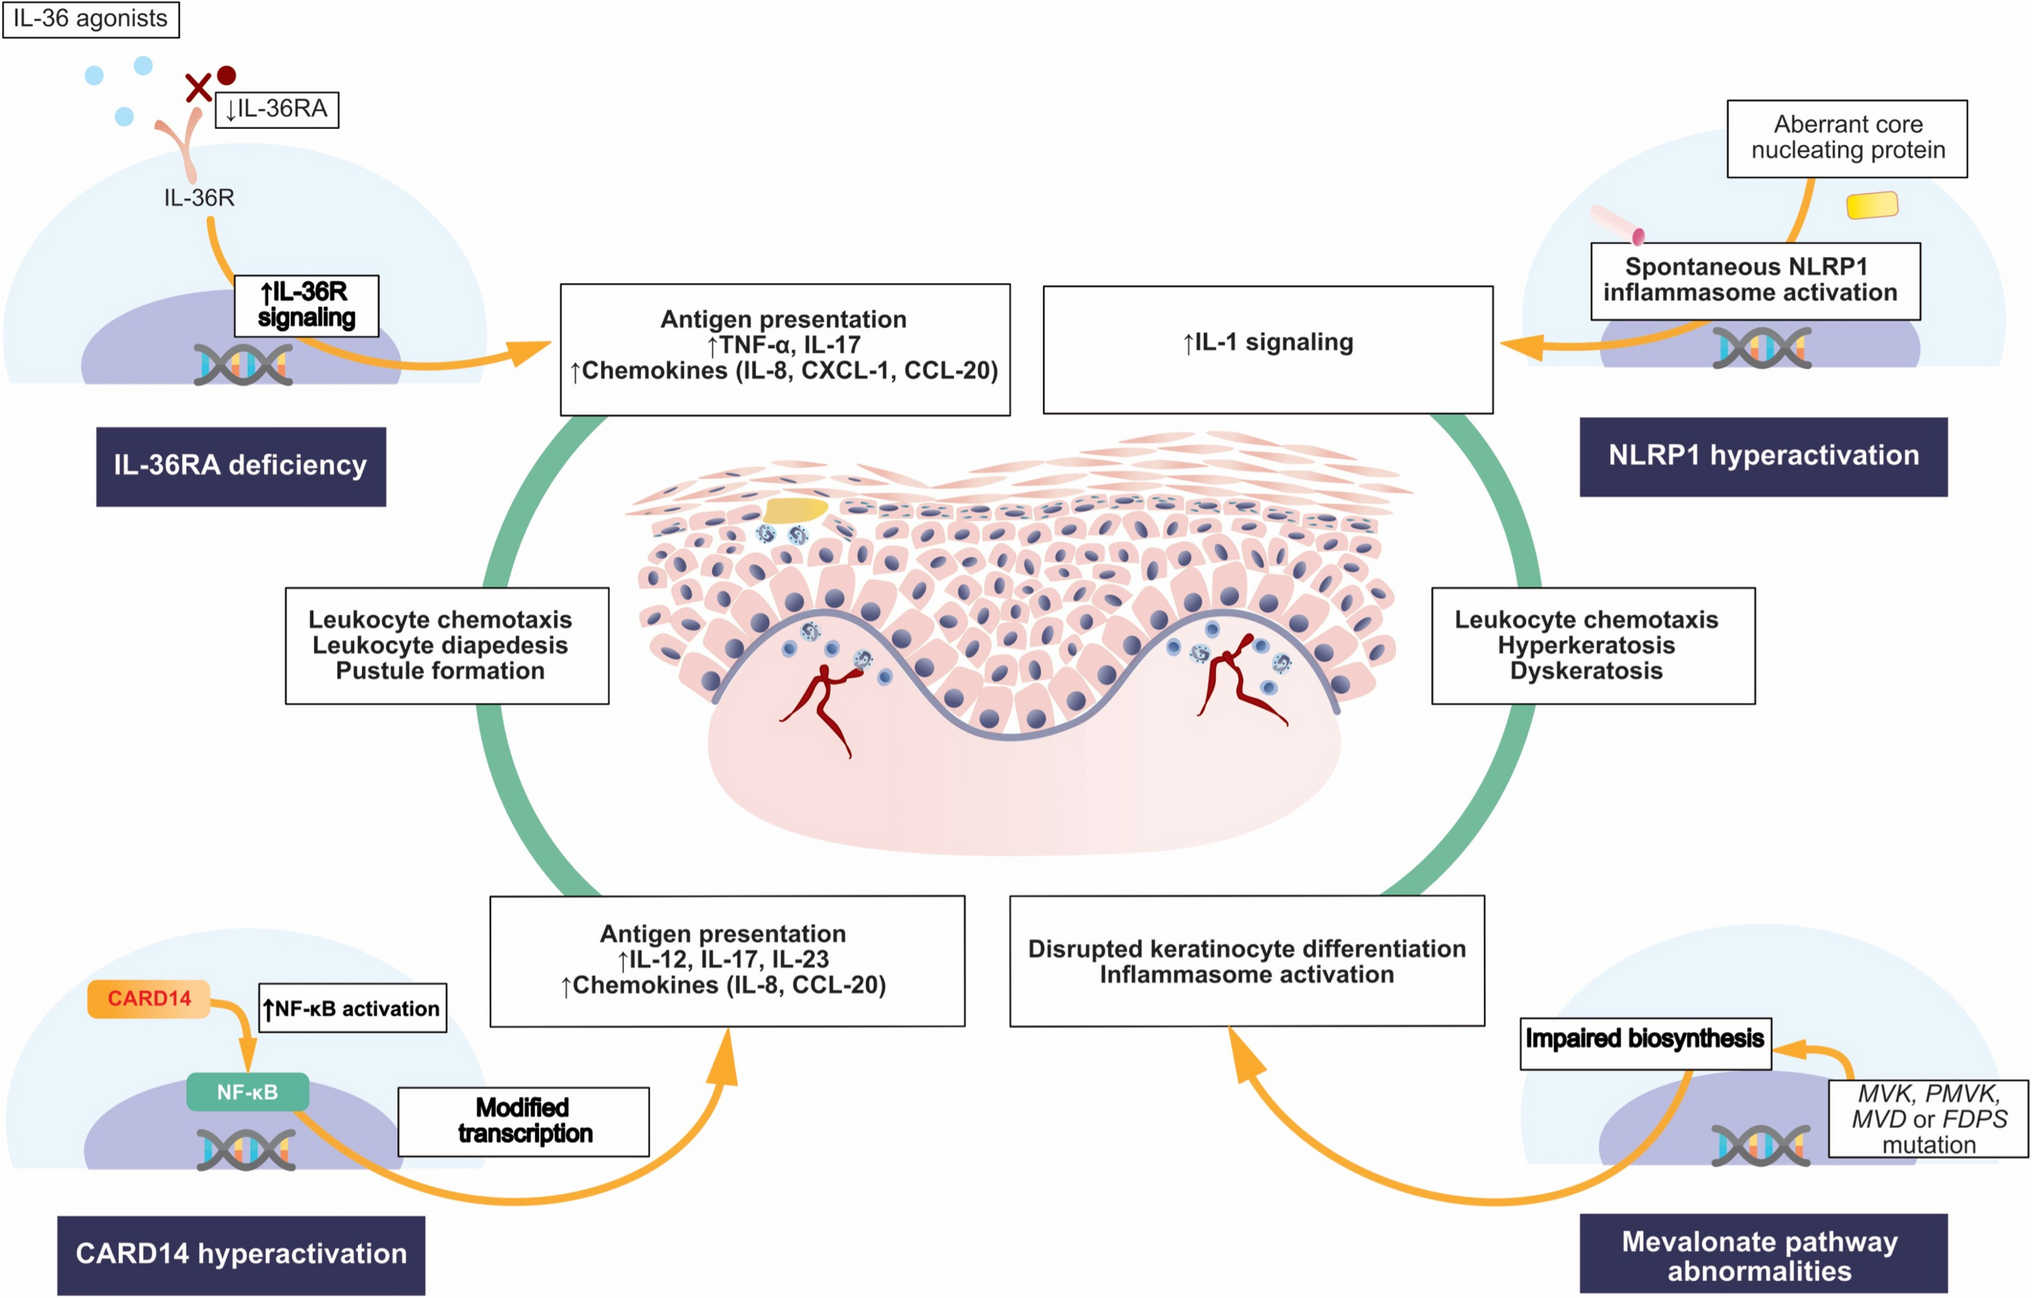 Autoinflammatory Keratinization Diseases—The Concept, Pathophysiology, and Clinical Implications